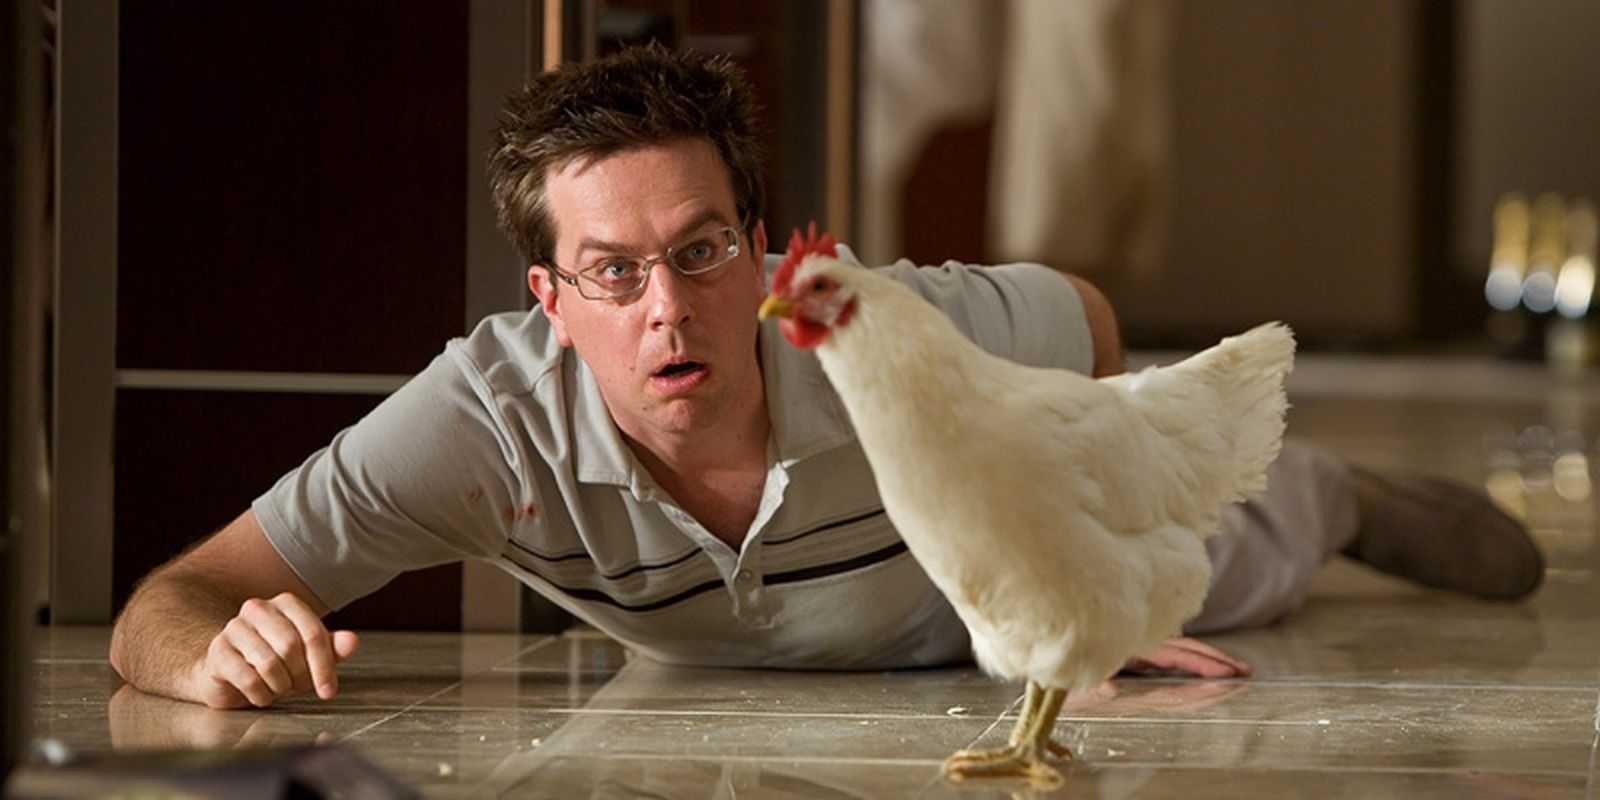 Stu scared of a chicken in The Hangover